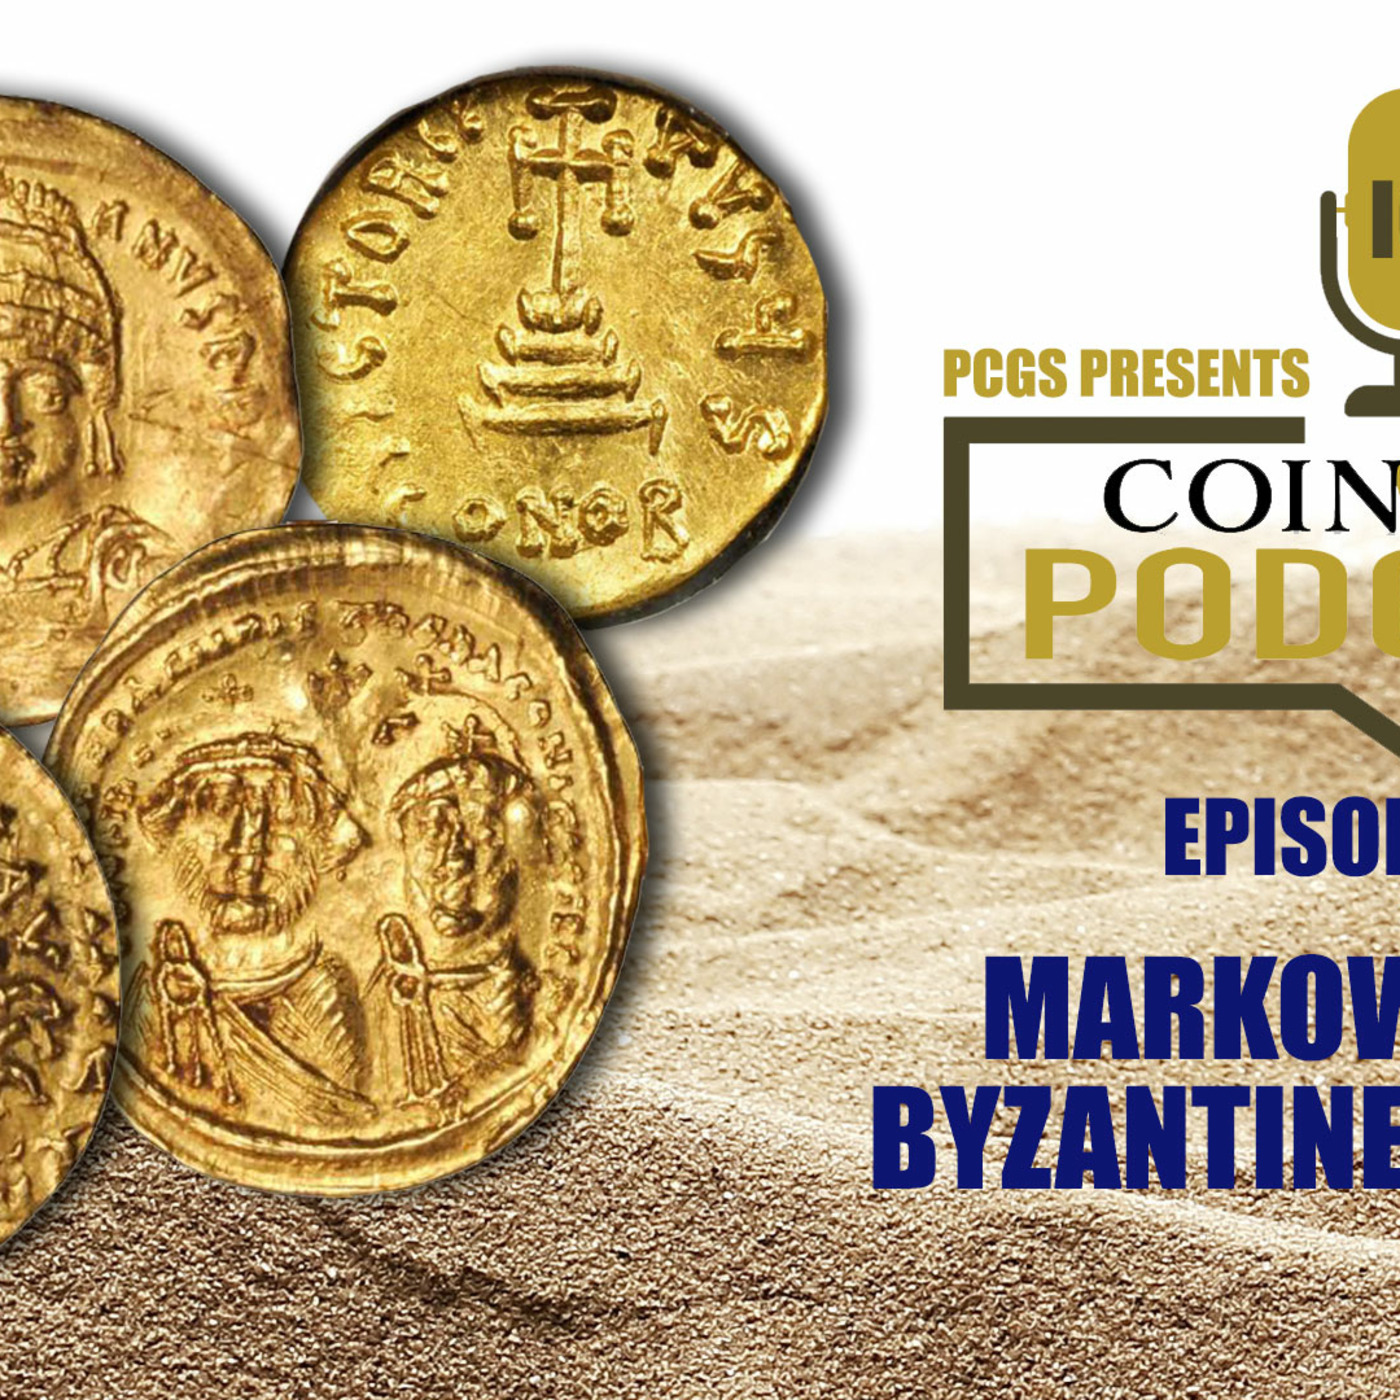 Episode 165: CoinWeek Podcast #165: Mike Markowitz on Byzantine Coins